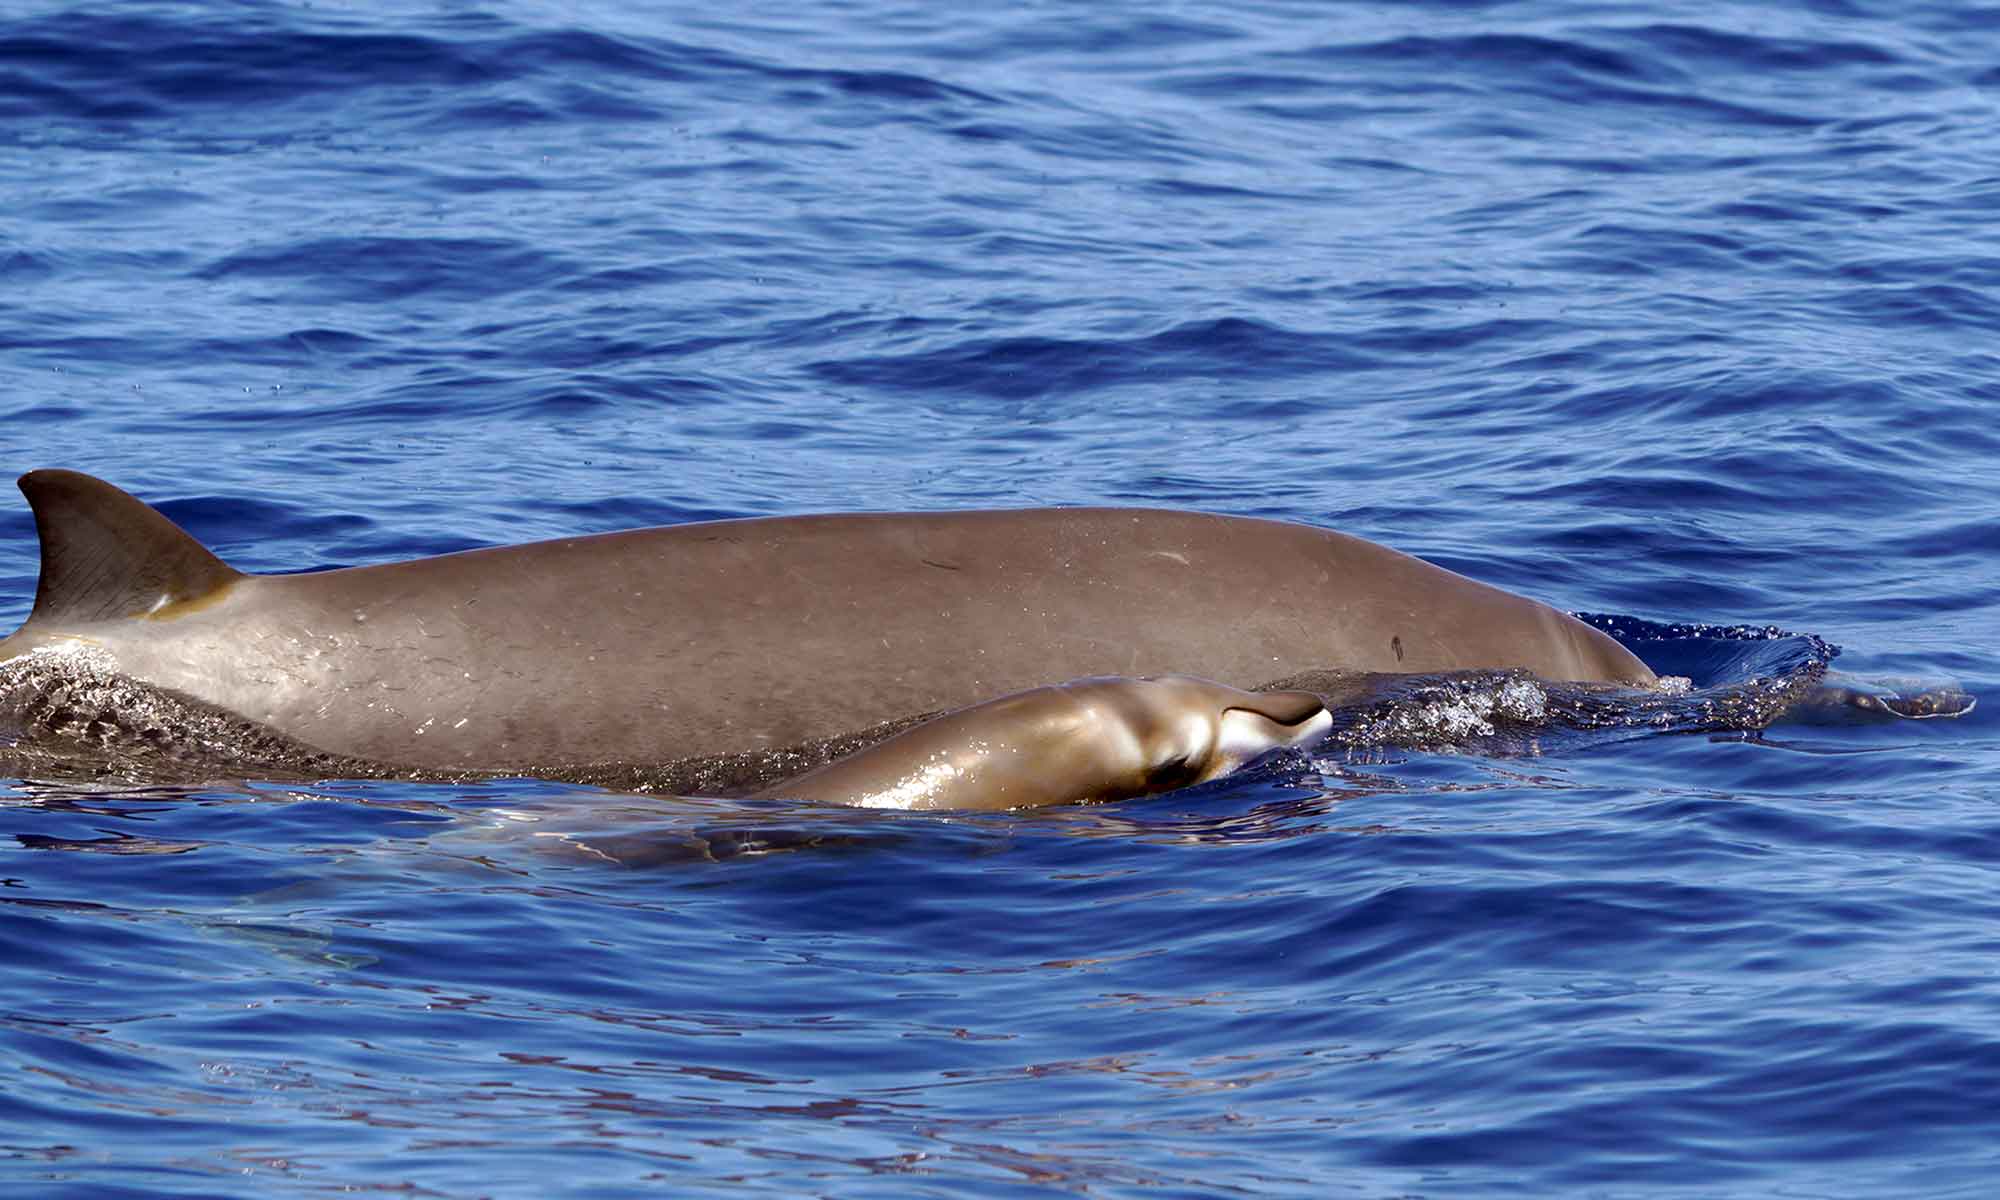 Blainville's Beaked whales are a rare species of deep diving whale seen during the summer months in Madeira.